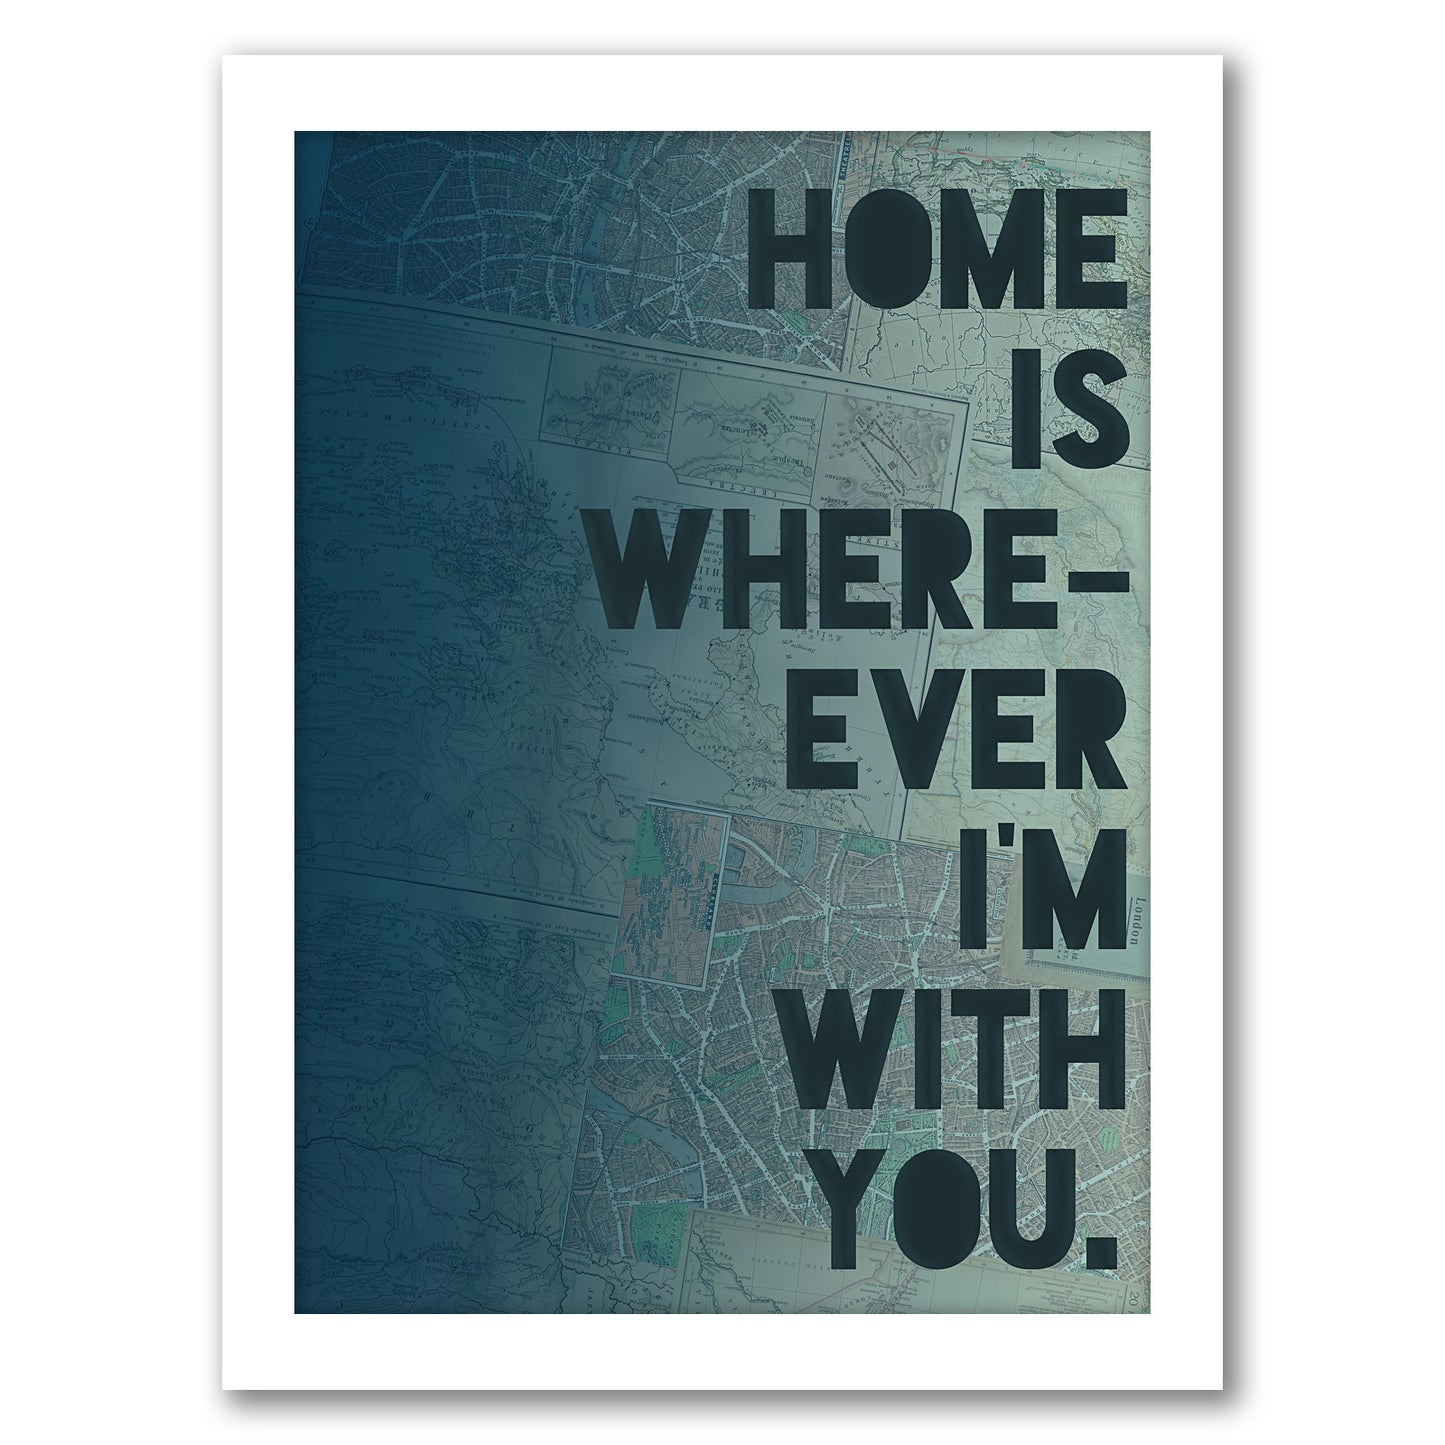 Home by Leah Flores - Framed Print